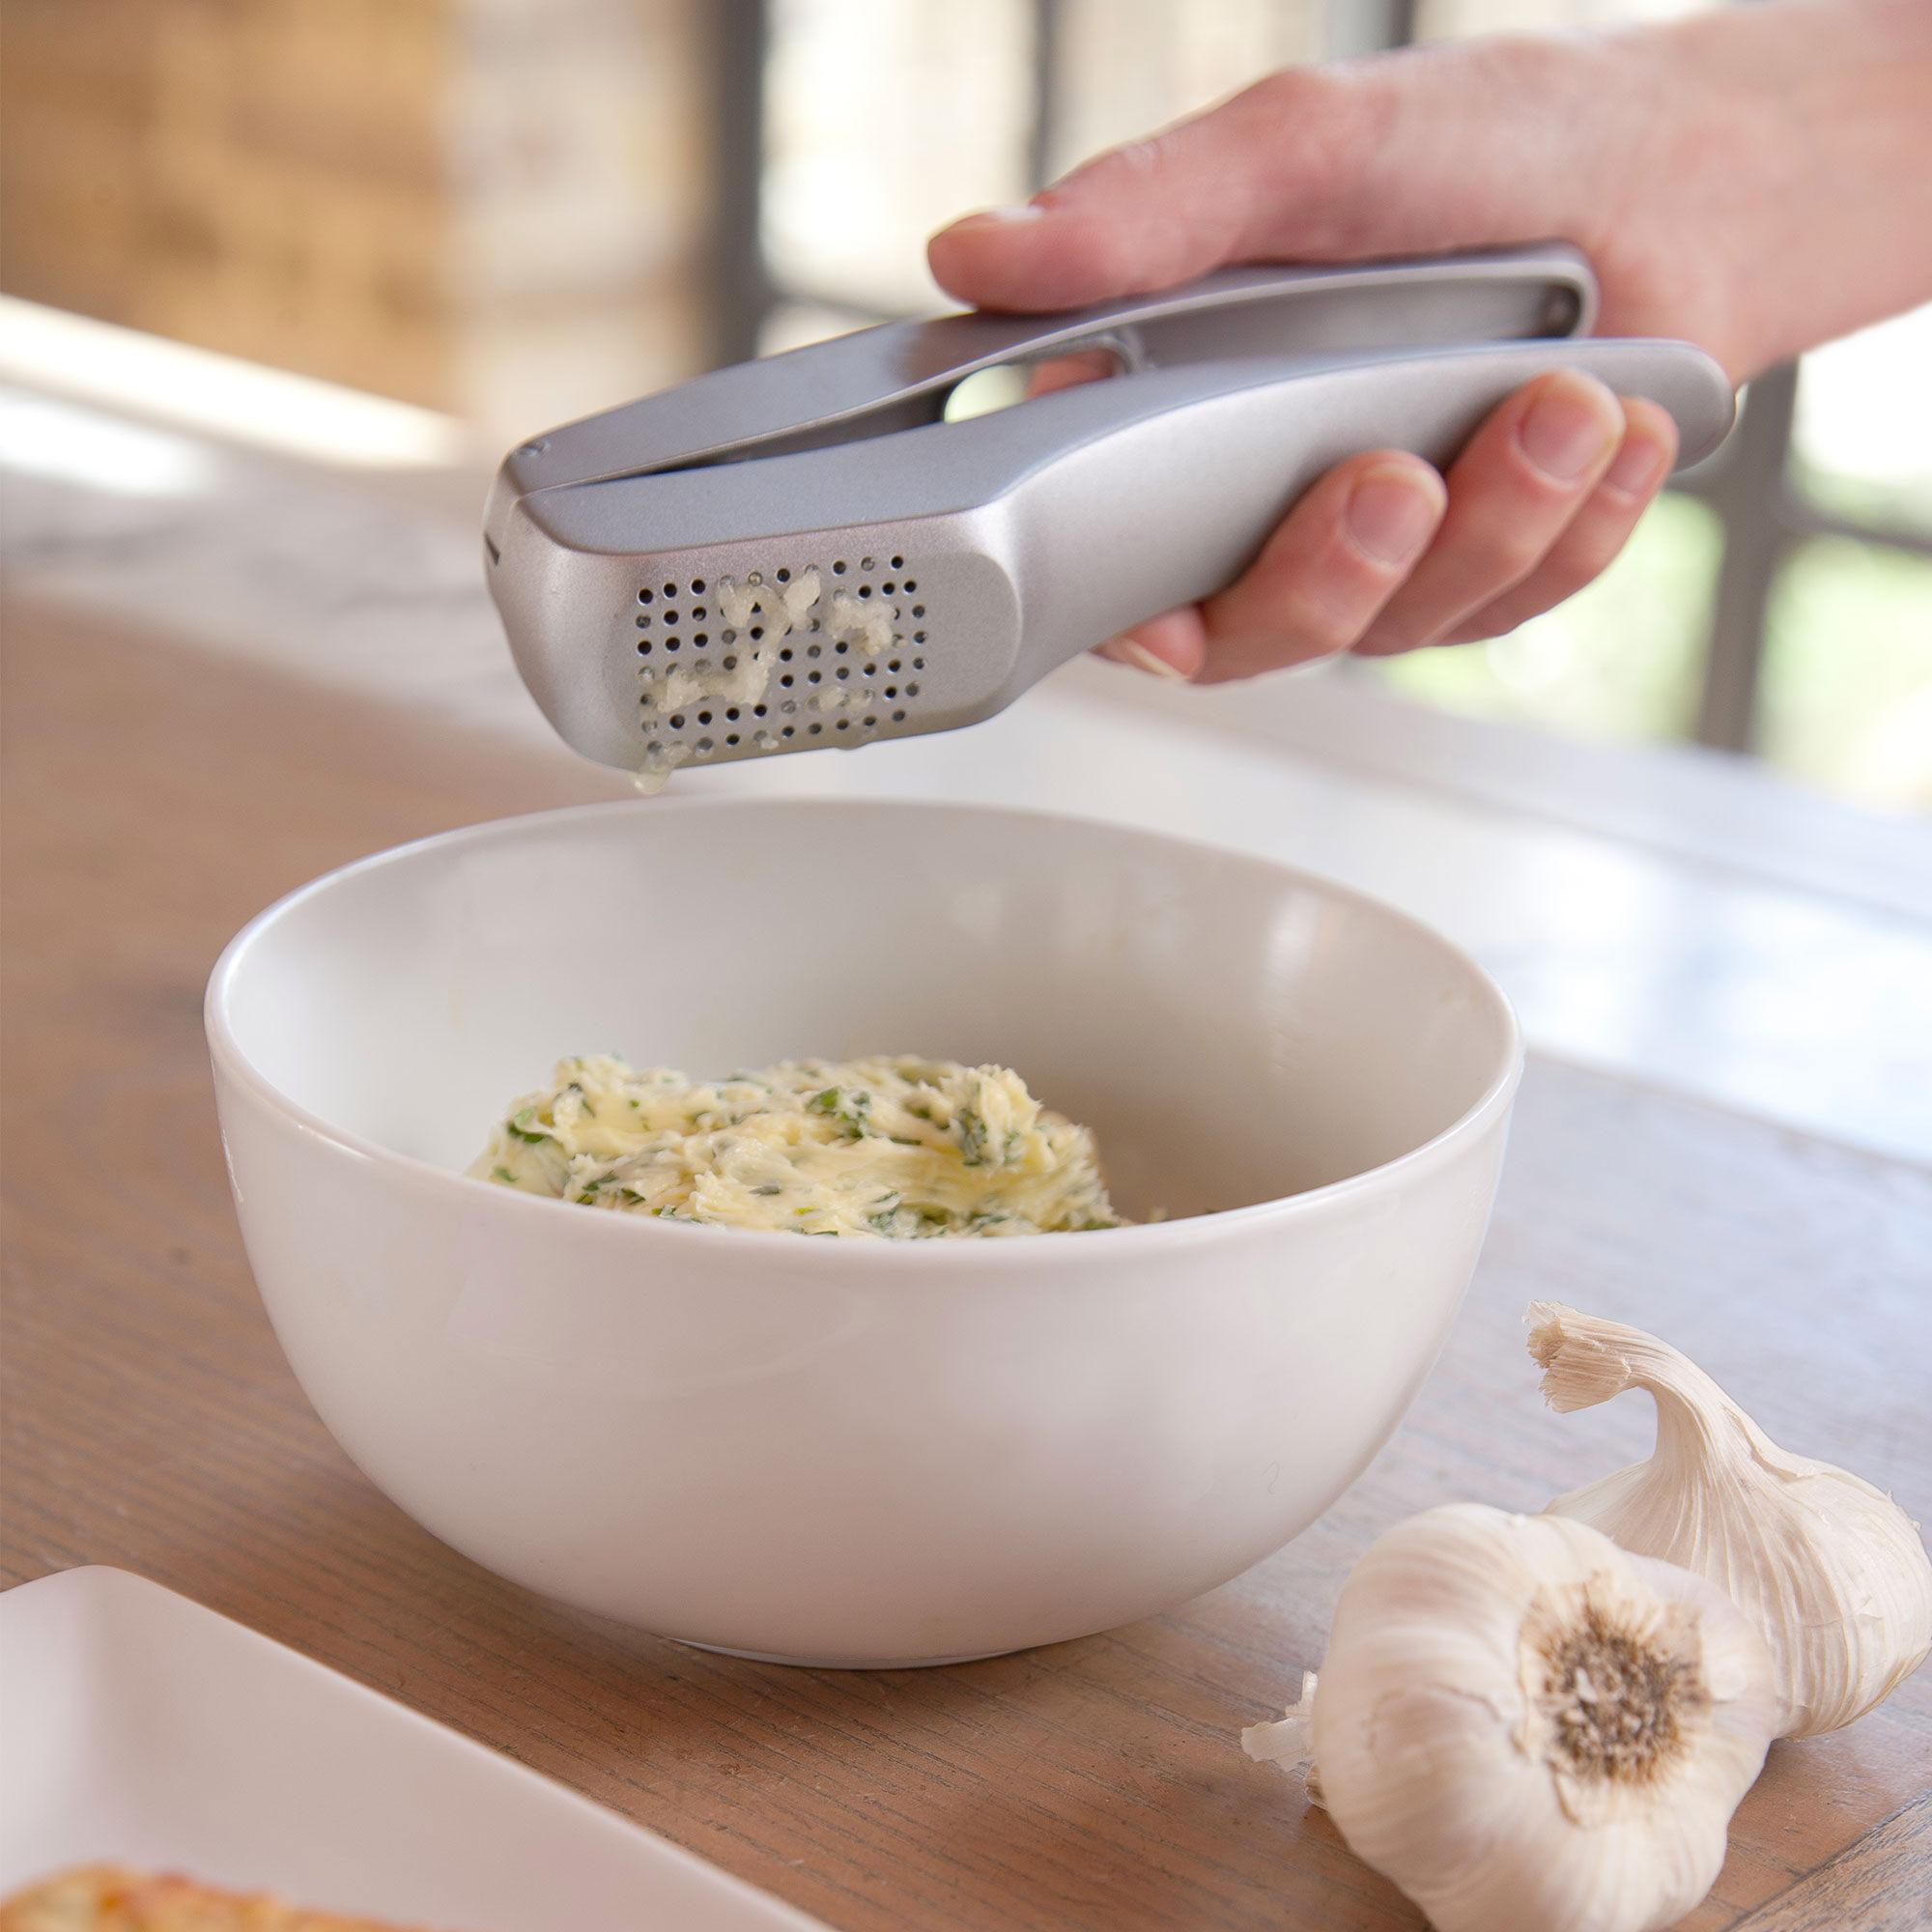 Zyliss Susi 3 Garlic Press with Cleaner Image 3